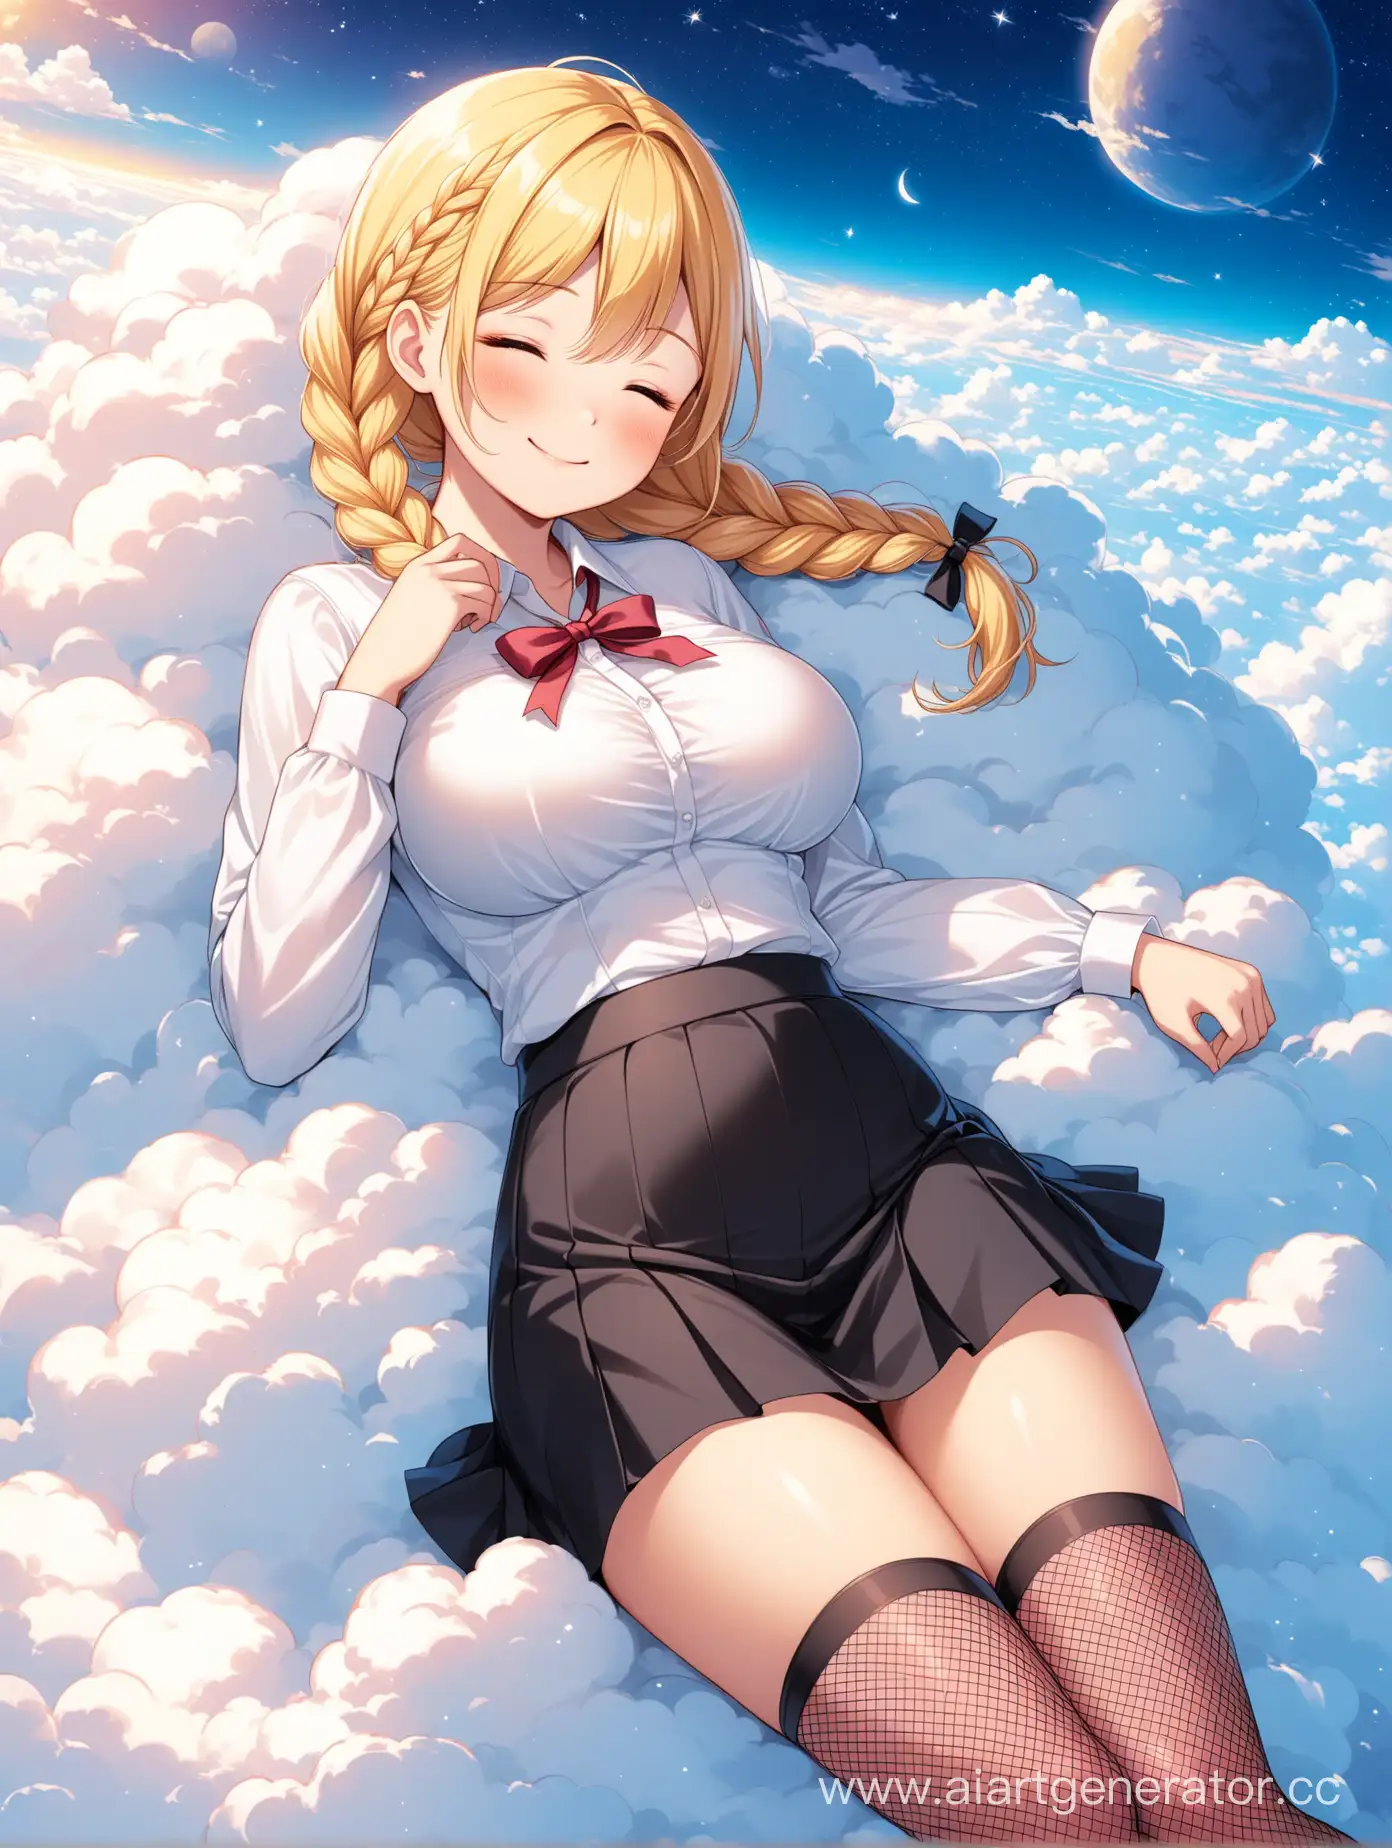  schoolgirl with a large  round bust, thin waist , blonde with two Dutch braids, white tight blouse, black fishnet stockings, in blackmini skirt,  sleeping on the clouds in the paradisel  sky, paradisel  bliss on the face , ruddy cheeks,  smiles in his sleep